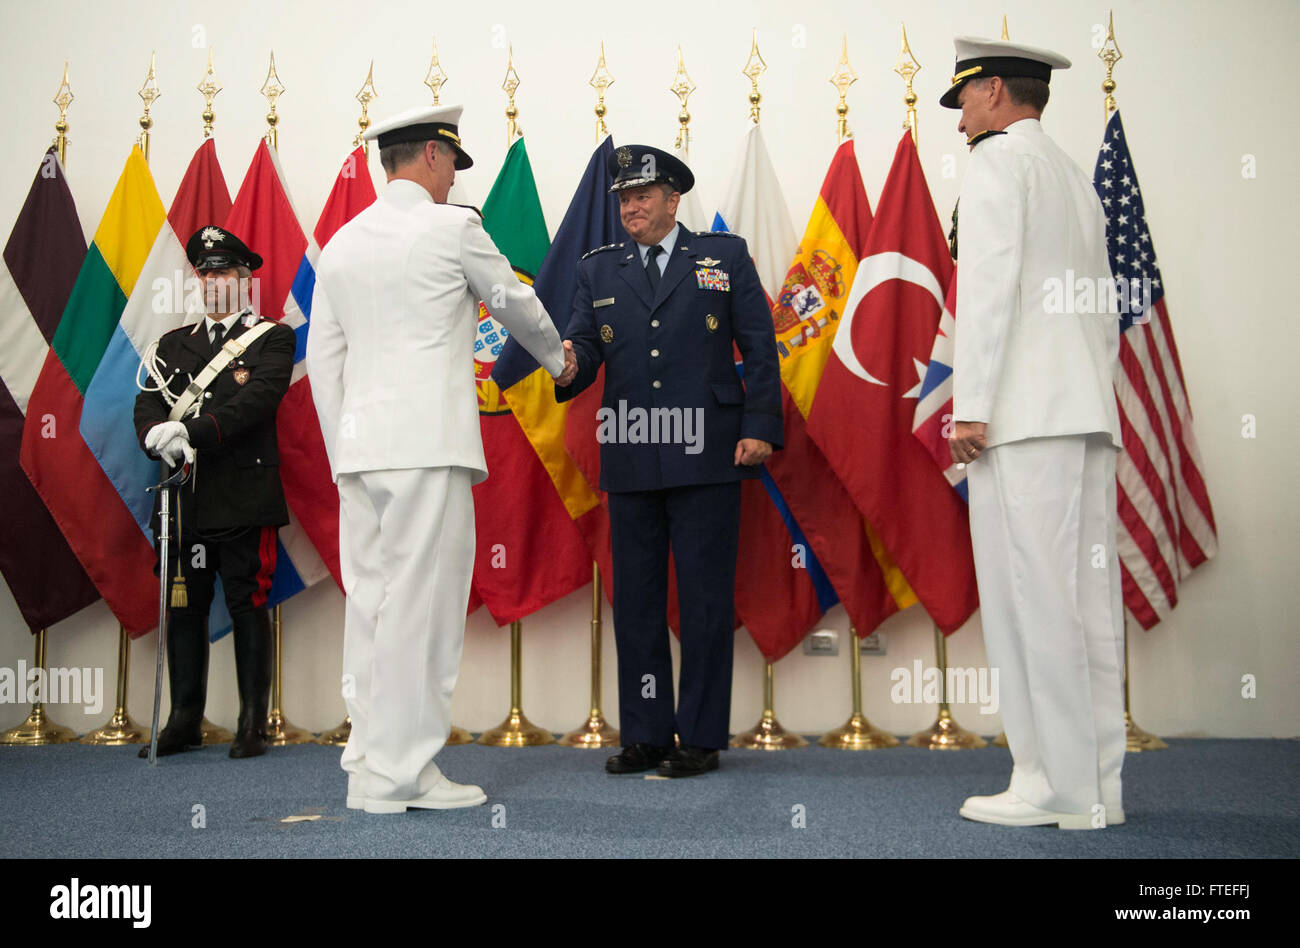 140722-N-FQ994-533 NAPLES, Italy (July 22, 2014) Gen. Philip Breedlove, Supreme Allied Commander, Europe/Commander, U.S. European Command, shakes hands with Adm. Bruce Clingan, left, after Adm. Mark Ferguson, right, relieved Clingan as Commander, Allied Joint Force Command Naples/Commander, U.S. Naval Forces Europe-Africa.  Clingan is retiring after 37 years of naval service. (U.S. Navy Photo by Mass Communication Specialist 3rd Class Weston Jones/Released) Stock Photo